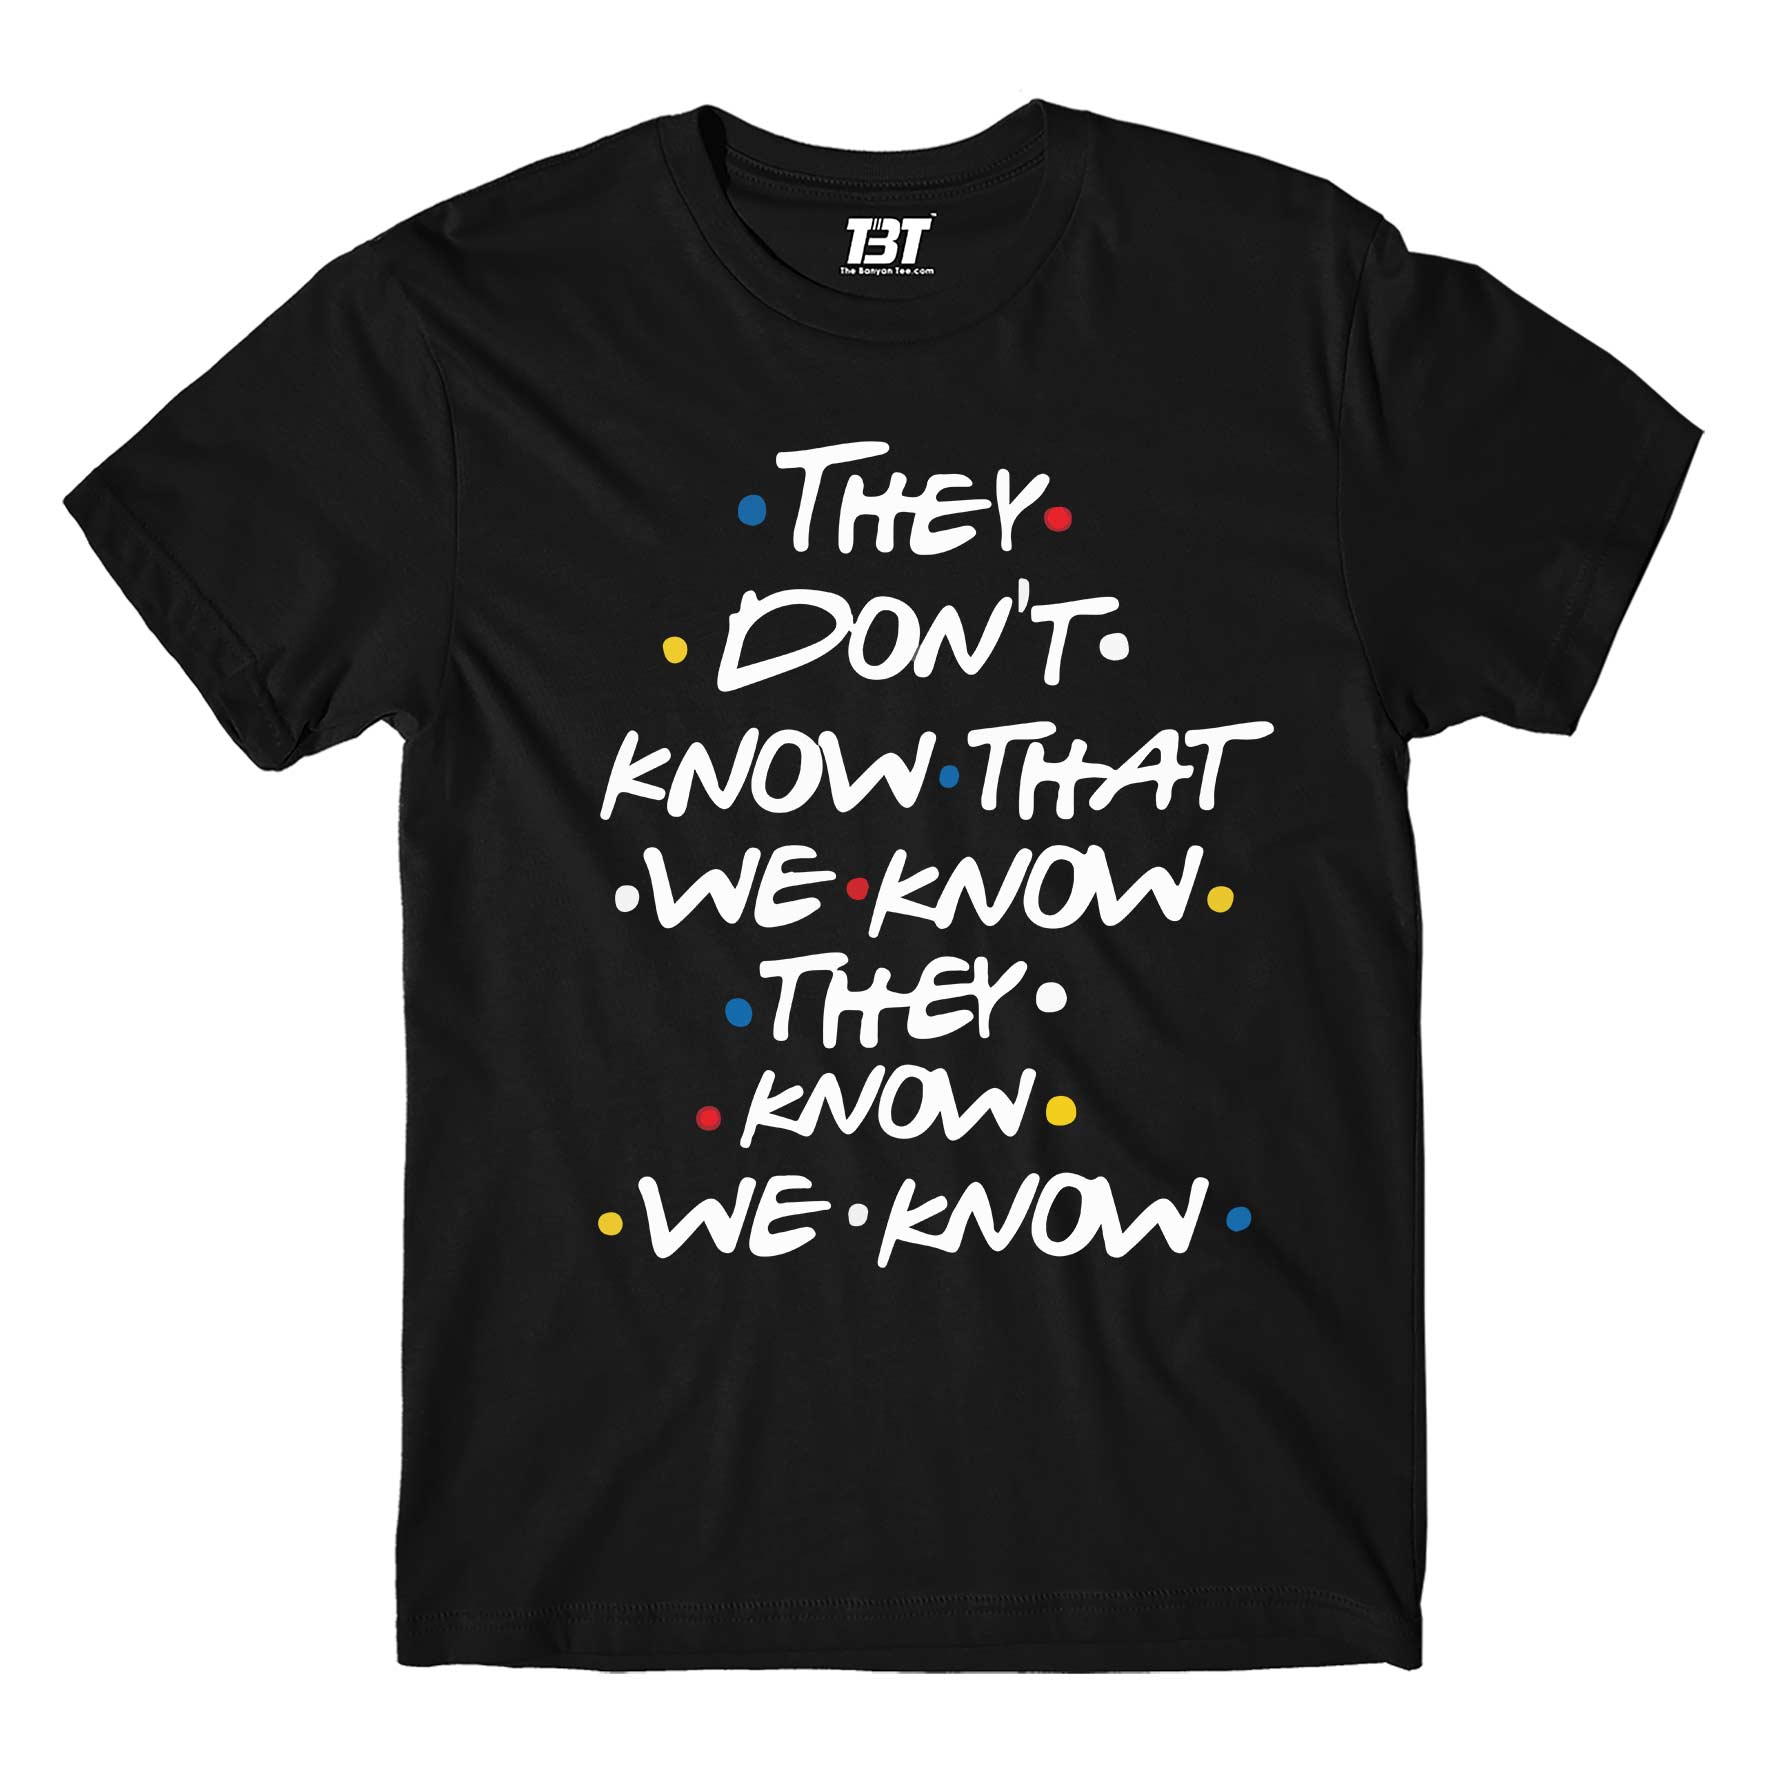 Friends T-shirt - They Don't Know by The Banyan Tee TBT